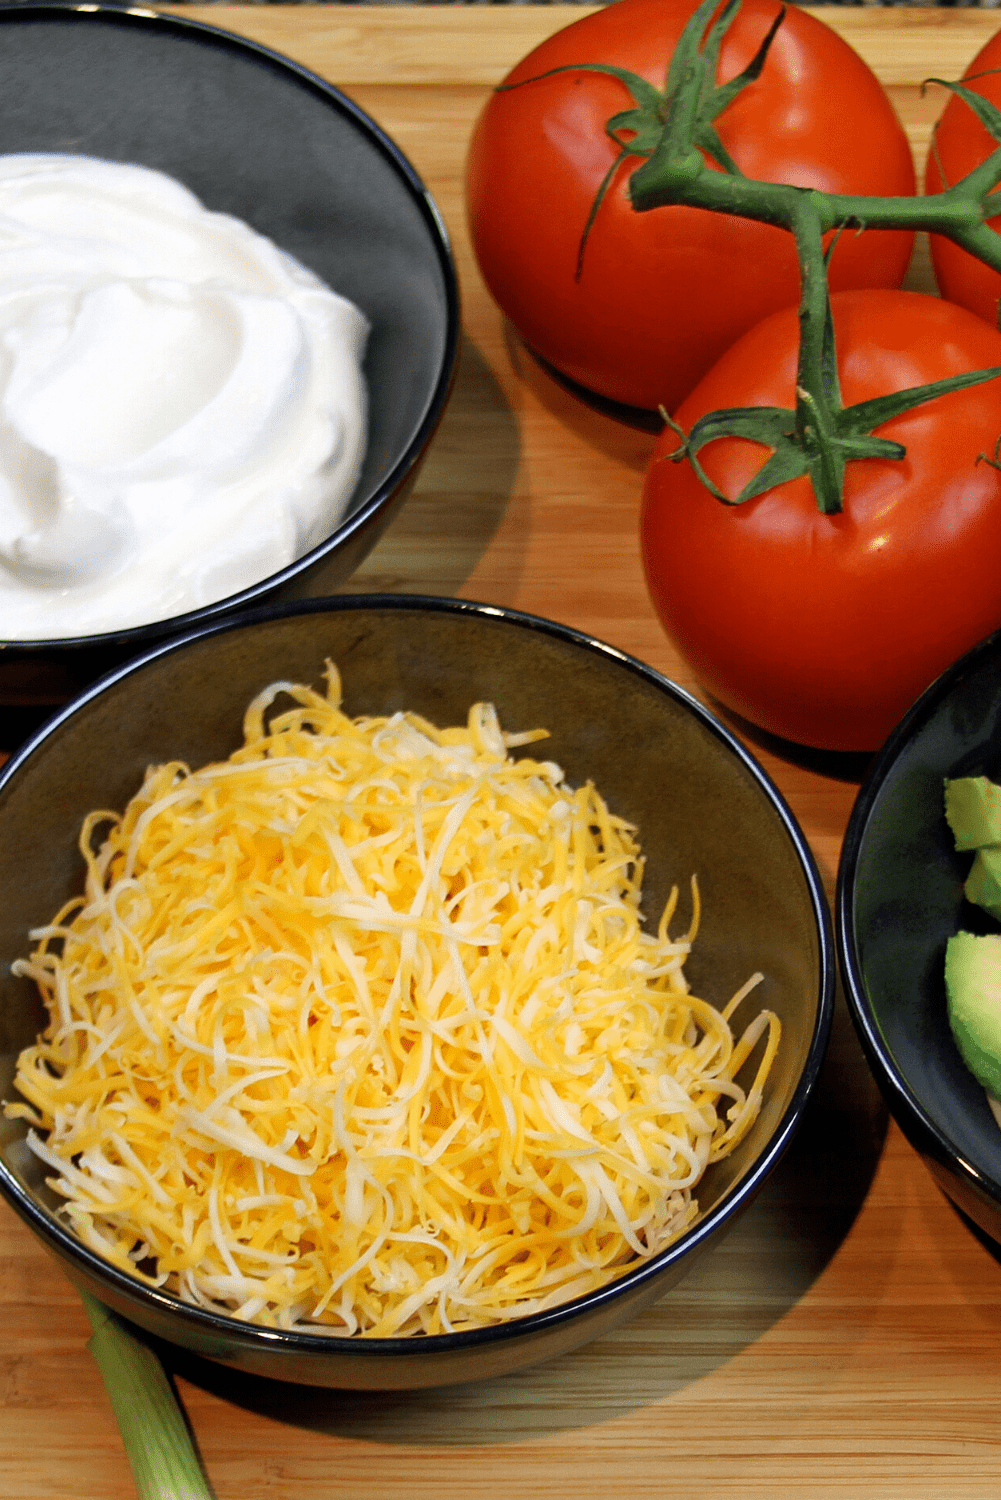 How to make simple and quick chili toppings